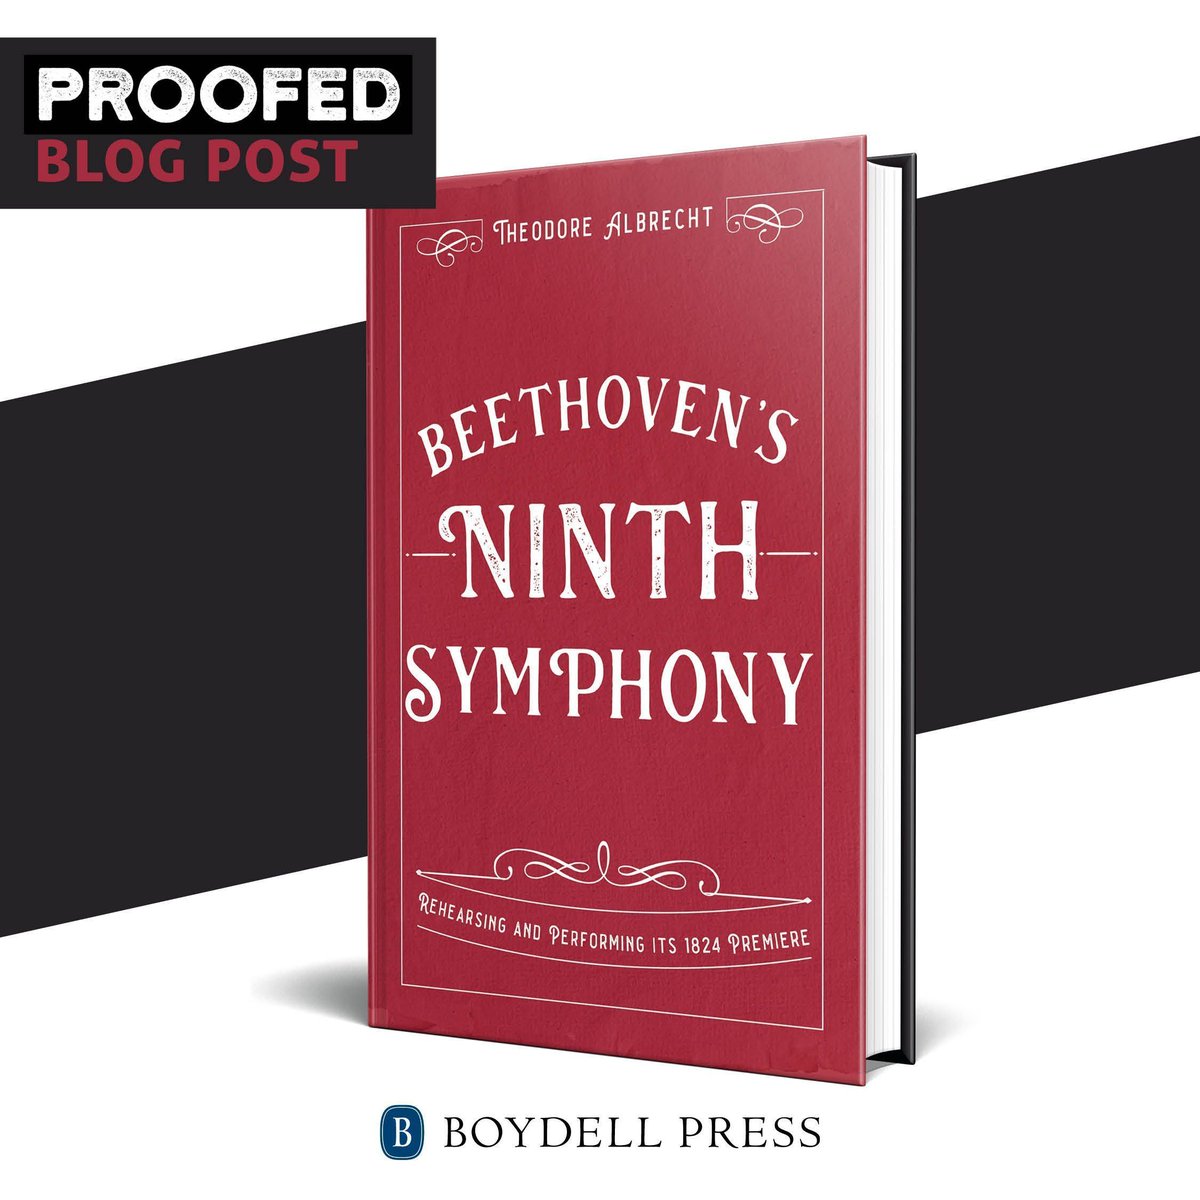 New blog post incoming!📣Author of 'Beethoven's Ninth Symphony' Theodore Albrecht, takes us through his journey with #Beethoven in this interview: buff.ly/4bqDngD #ProofedBlog #MusicStudies #BeethovenNinthSymphony